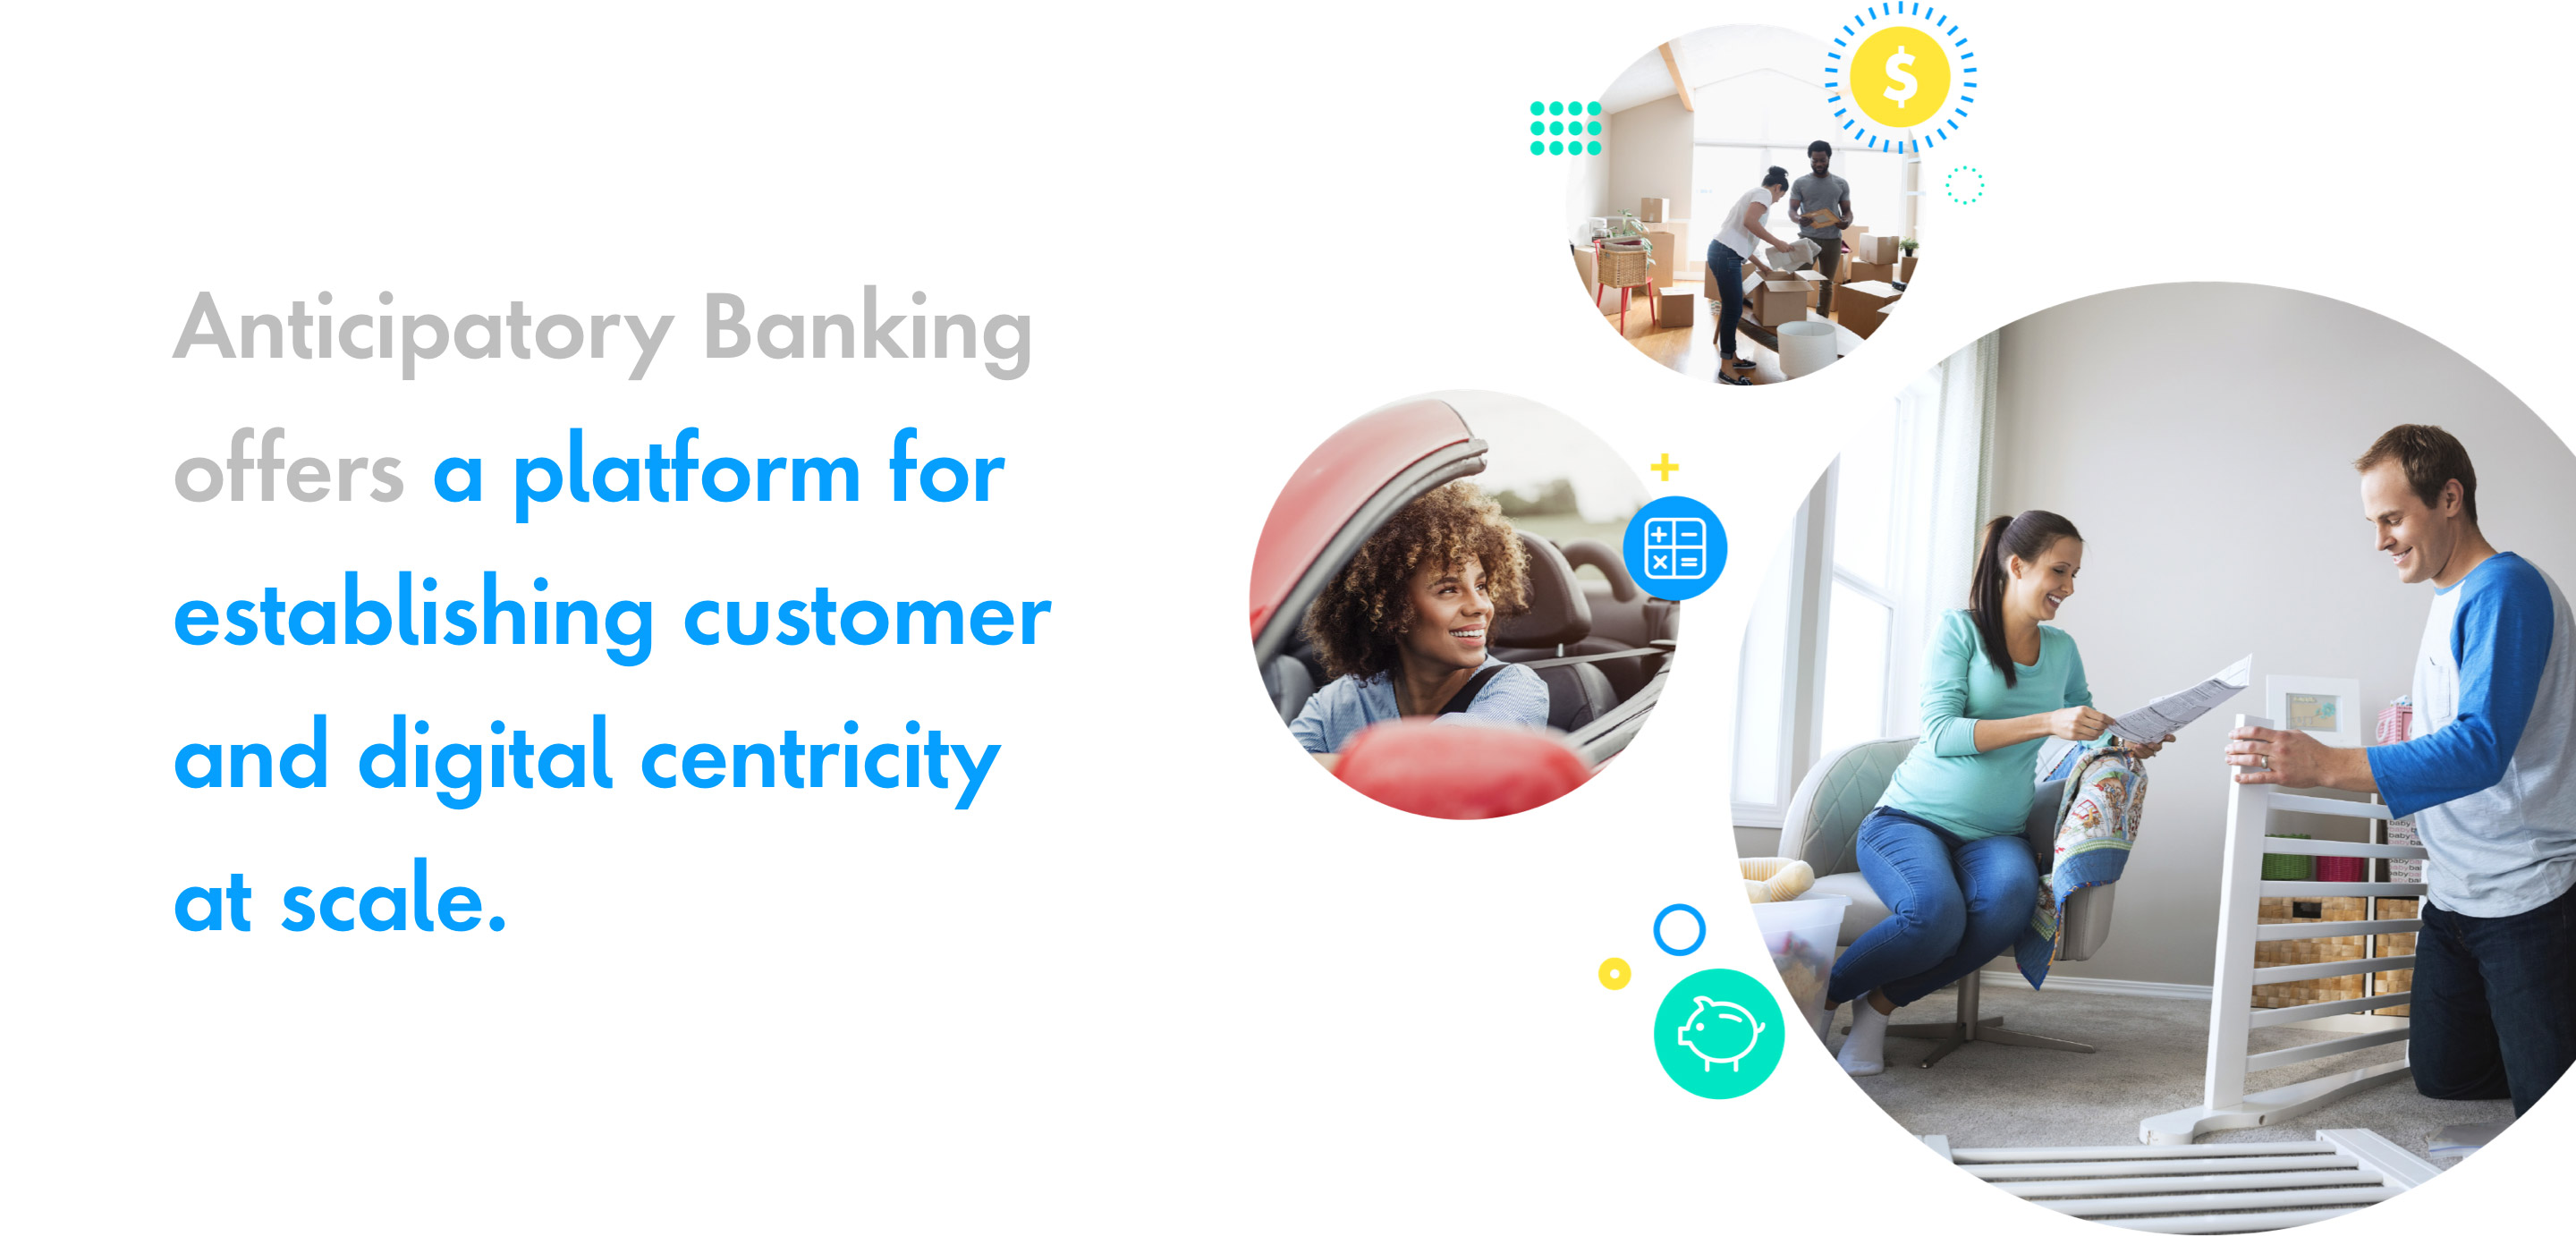 Anticipatory Banking offers a platform for establishing customer and digital centricity at scale